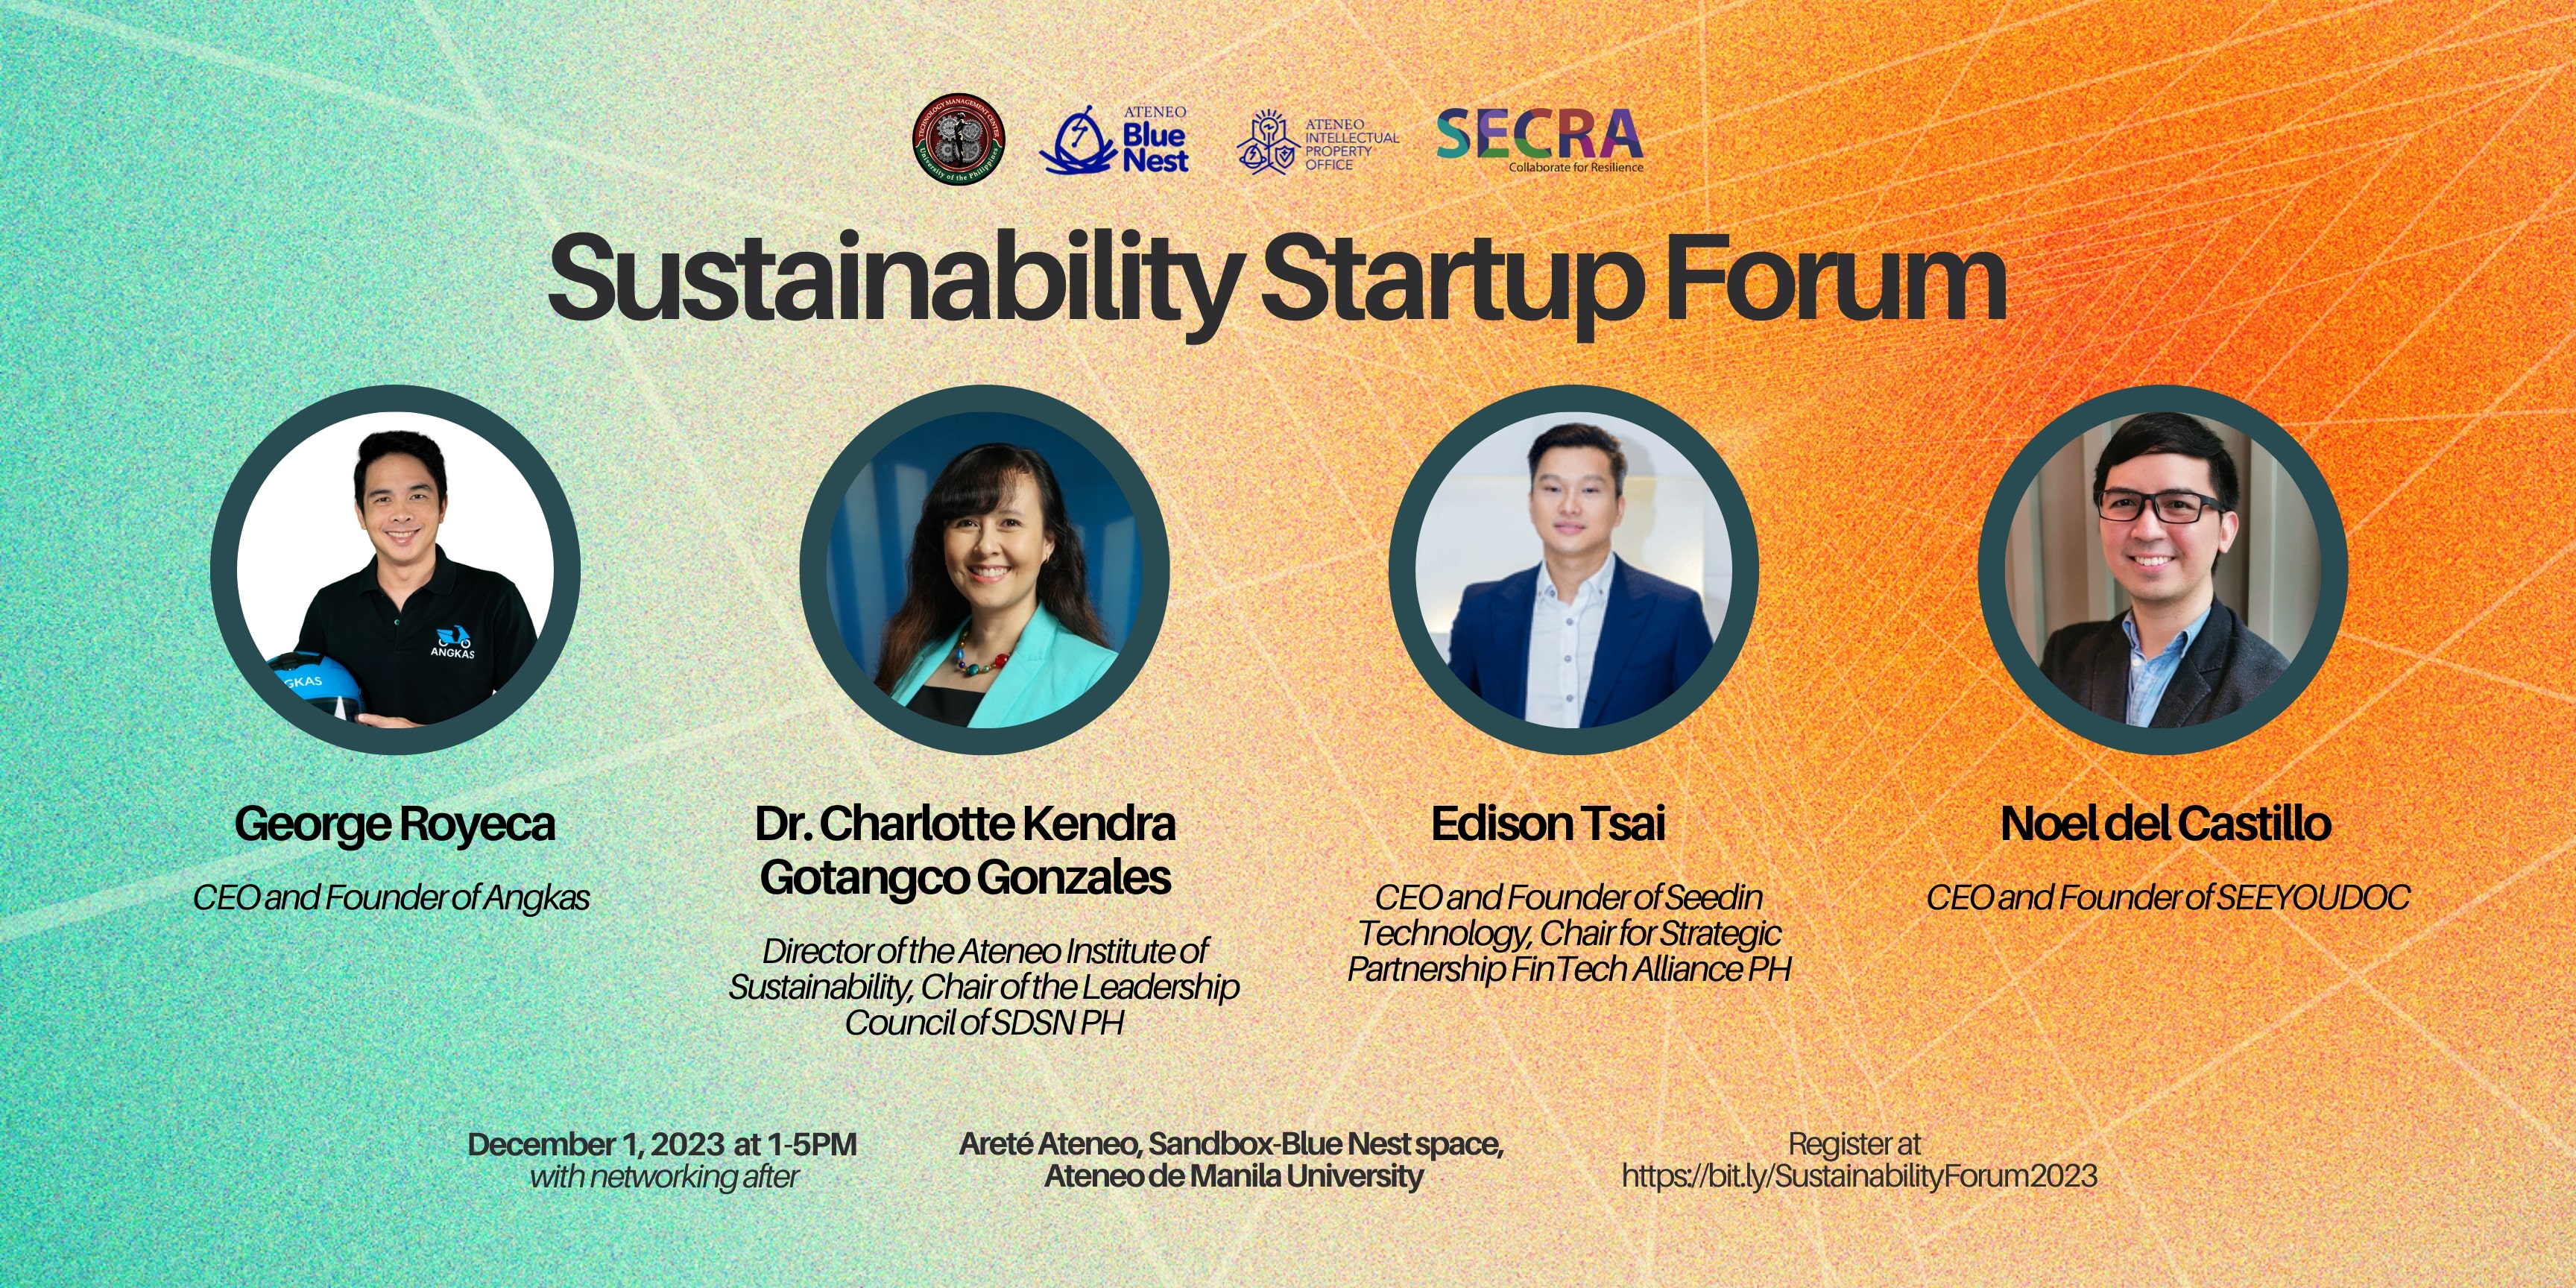 From left to right: George Royeca, CEO and Founder of Angkas; Dr. Charlotte Kendra Gotangco Gonzales, Director of the Ateneo Institute of Sustainability; Edison Tsai, CEO and Founder of SeedIn Technology; Noel del Castillo, CEO and Founder of SeeYouDoc